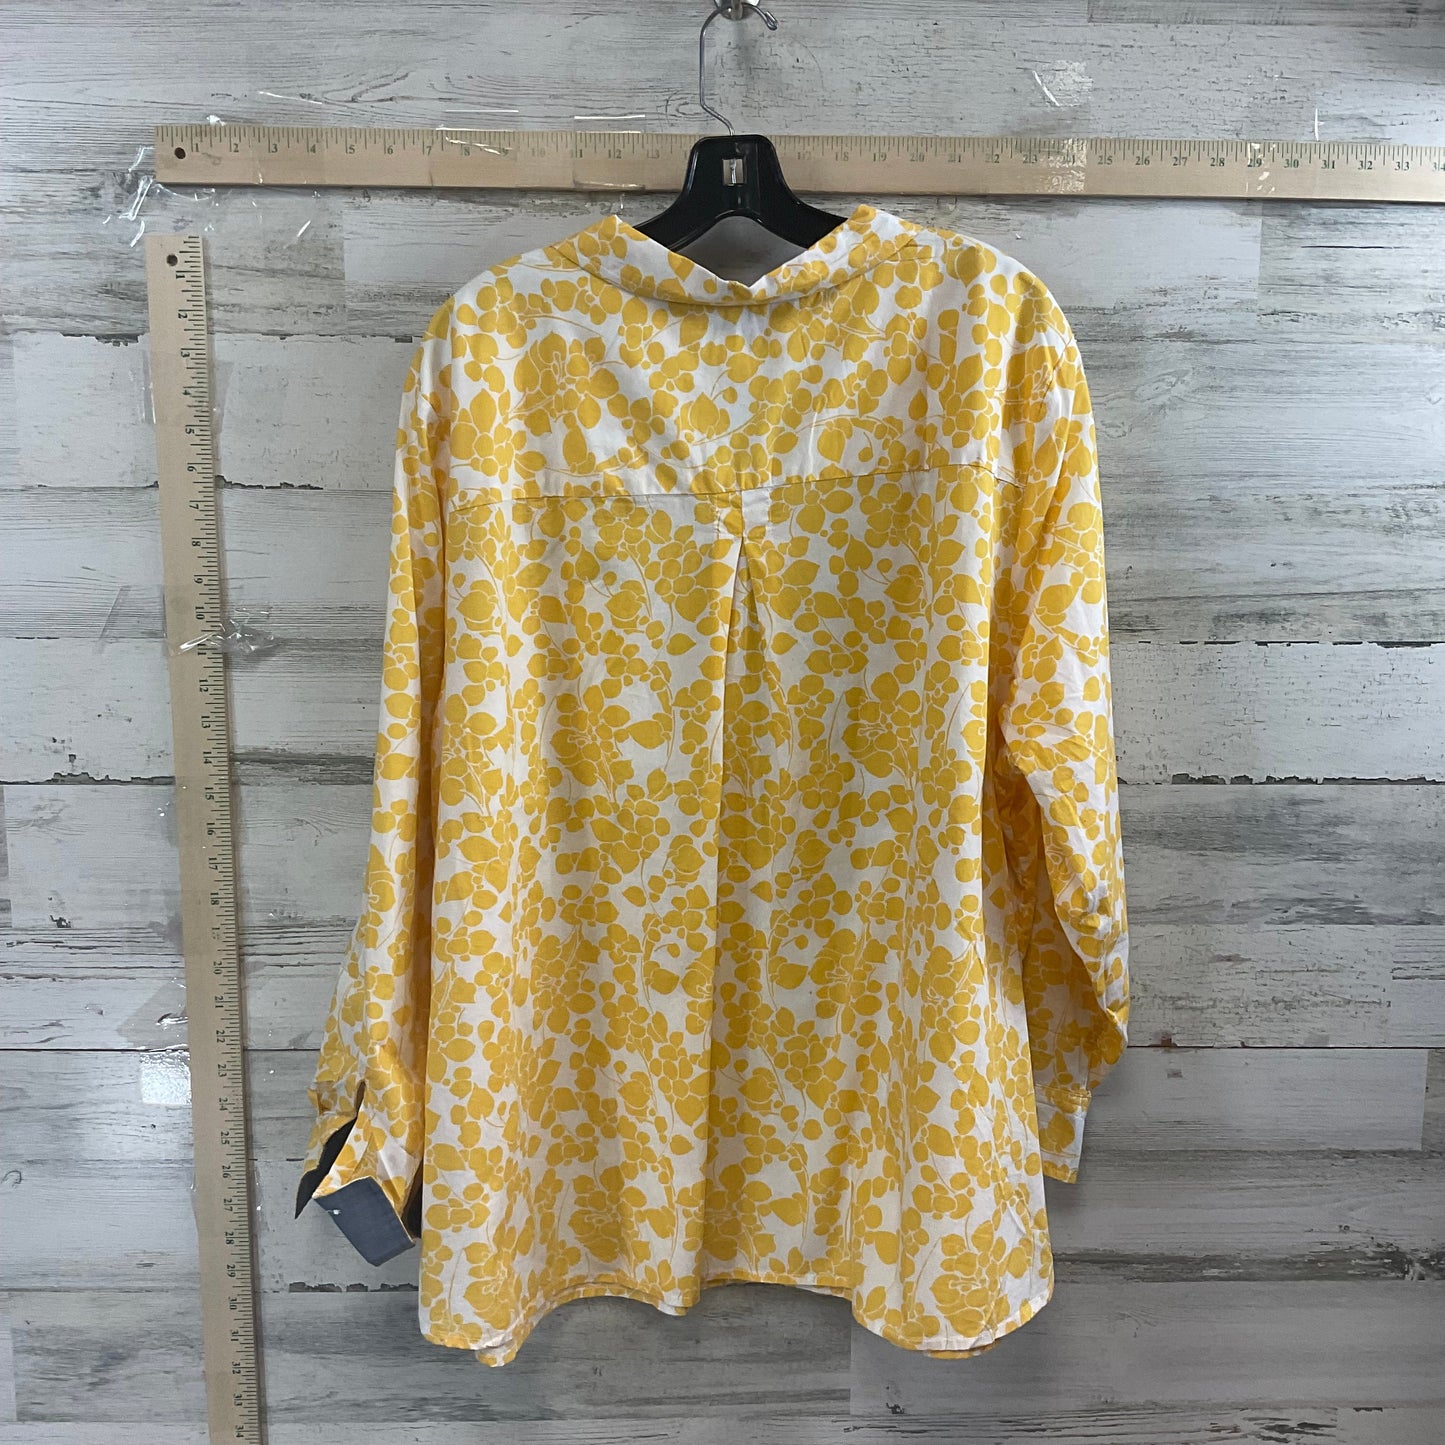 Yellow Top Long Sleeve Tommy Hilfiger, Size 2x